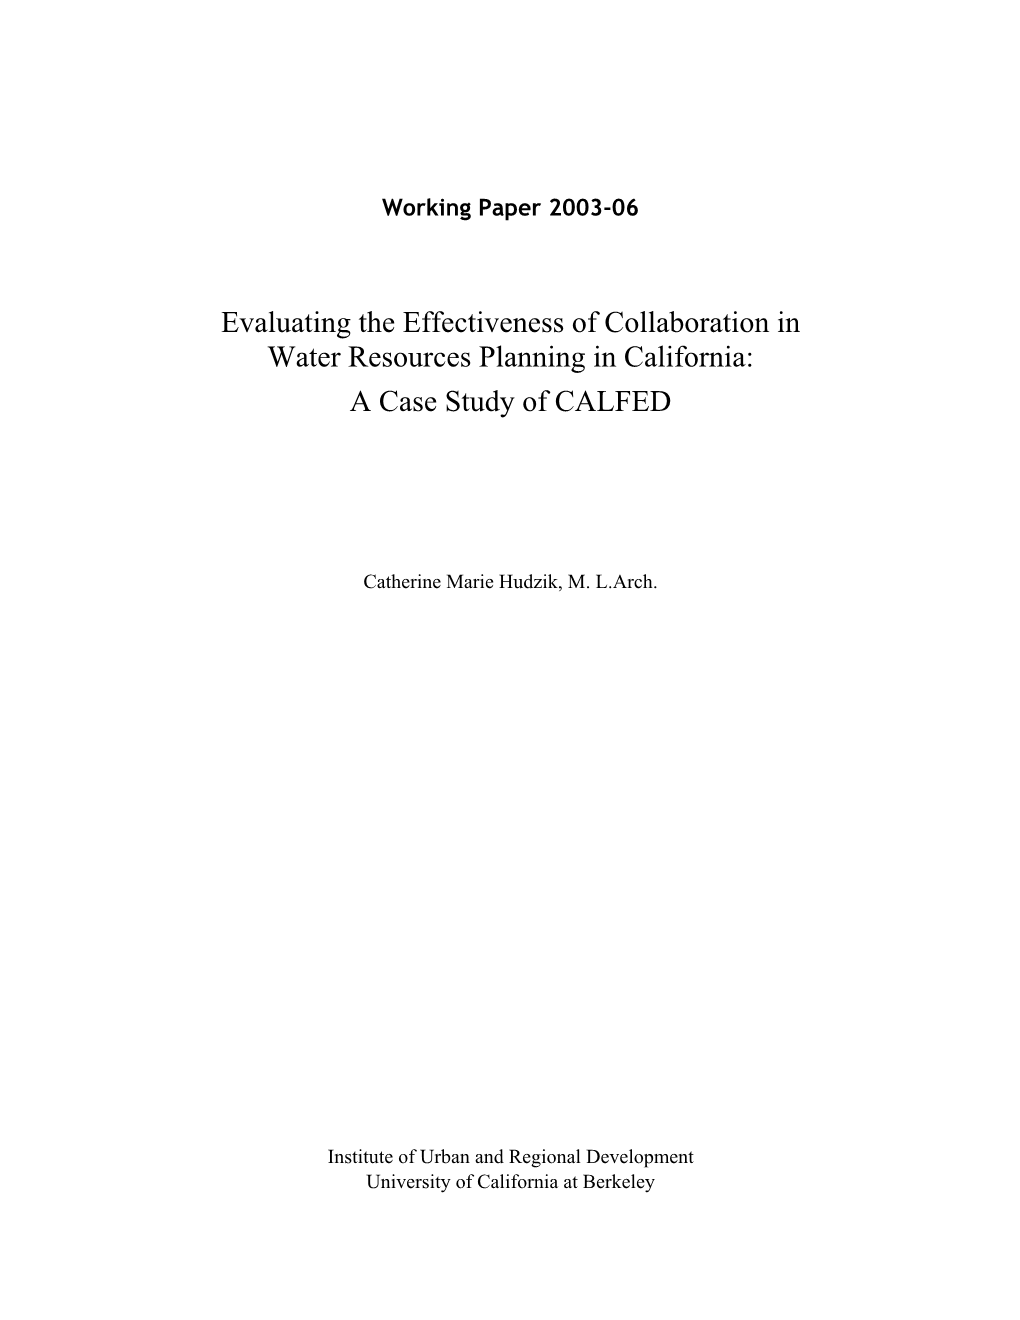 Evaluating the Effectiveness of Collaboration in Water Resources Planning in California: a Case Study of CALFED